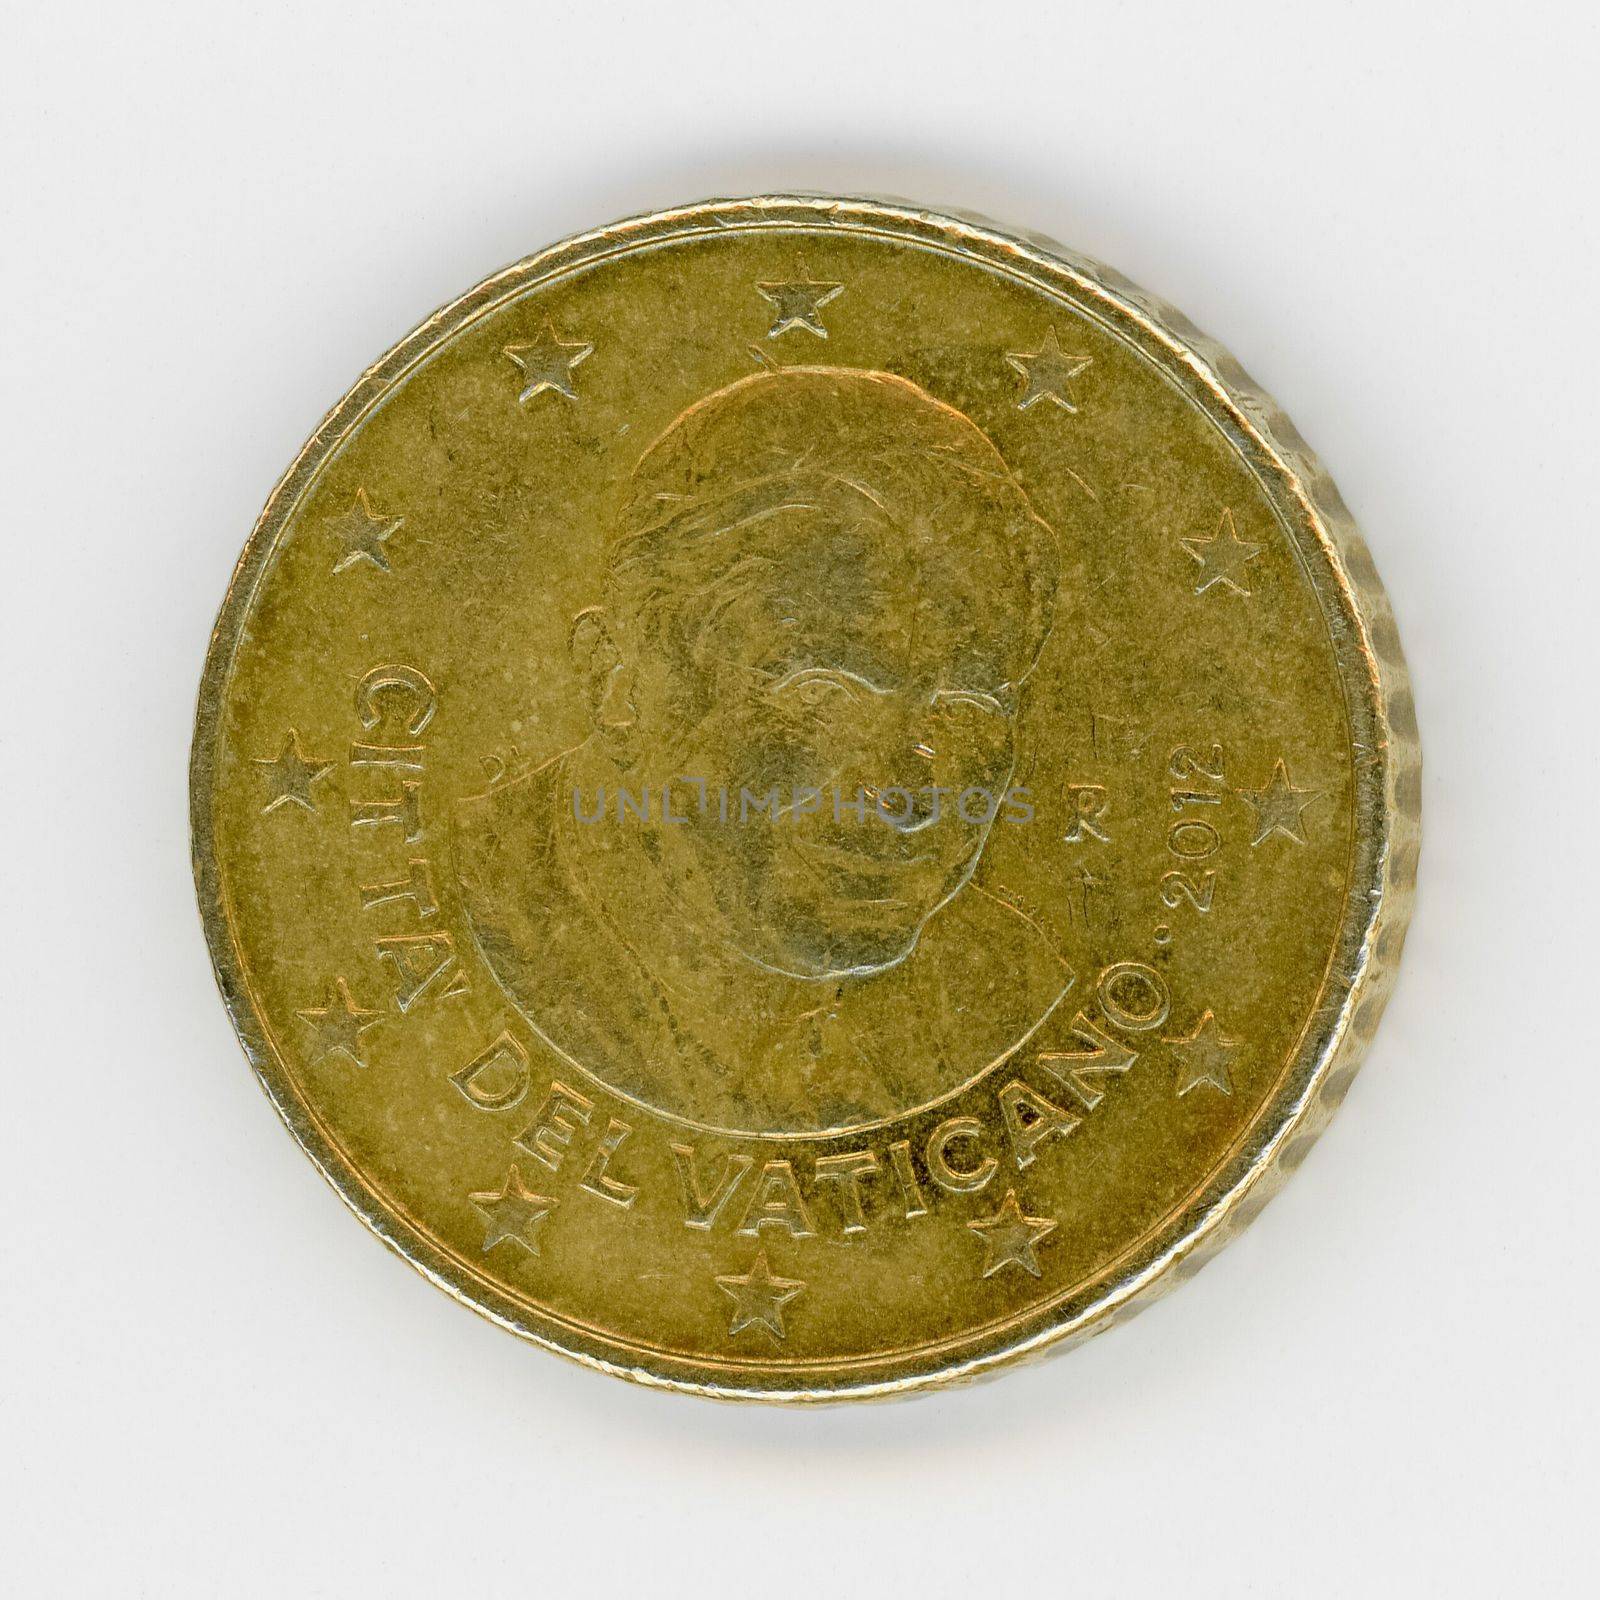 50 cents coin money (EUR), currency of Vatican City, European Union with Pope Benedict XVI born Joseph Ratzinger